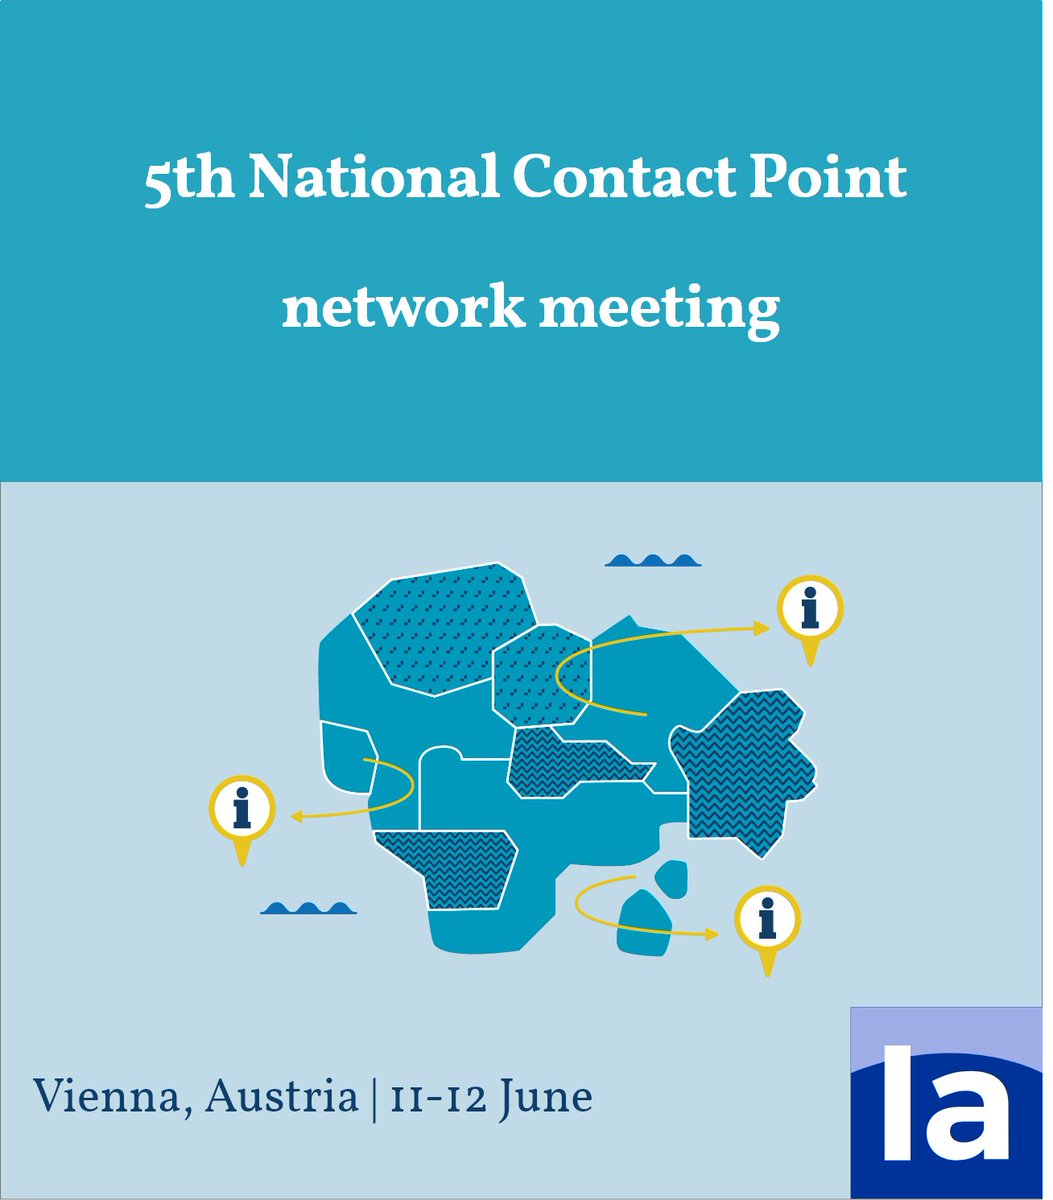 Join the 5th NCP network meeting on 11-12 June in Vienna, Austria. Colleagues from NCPs across all Interreg programmes, Interreg IPA and NEXT will delve into relevant topics, share experiences, identify common challenges and brainstorm on solutions. interact.eu/events/101